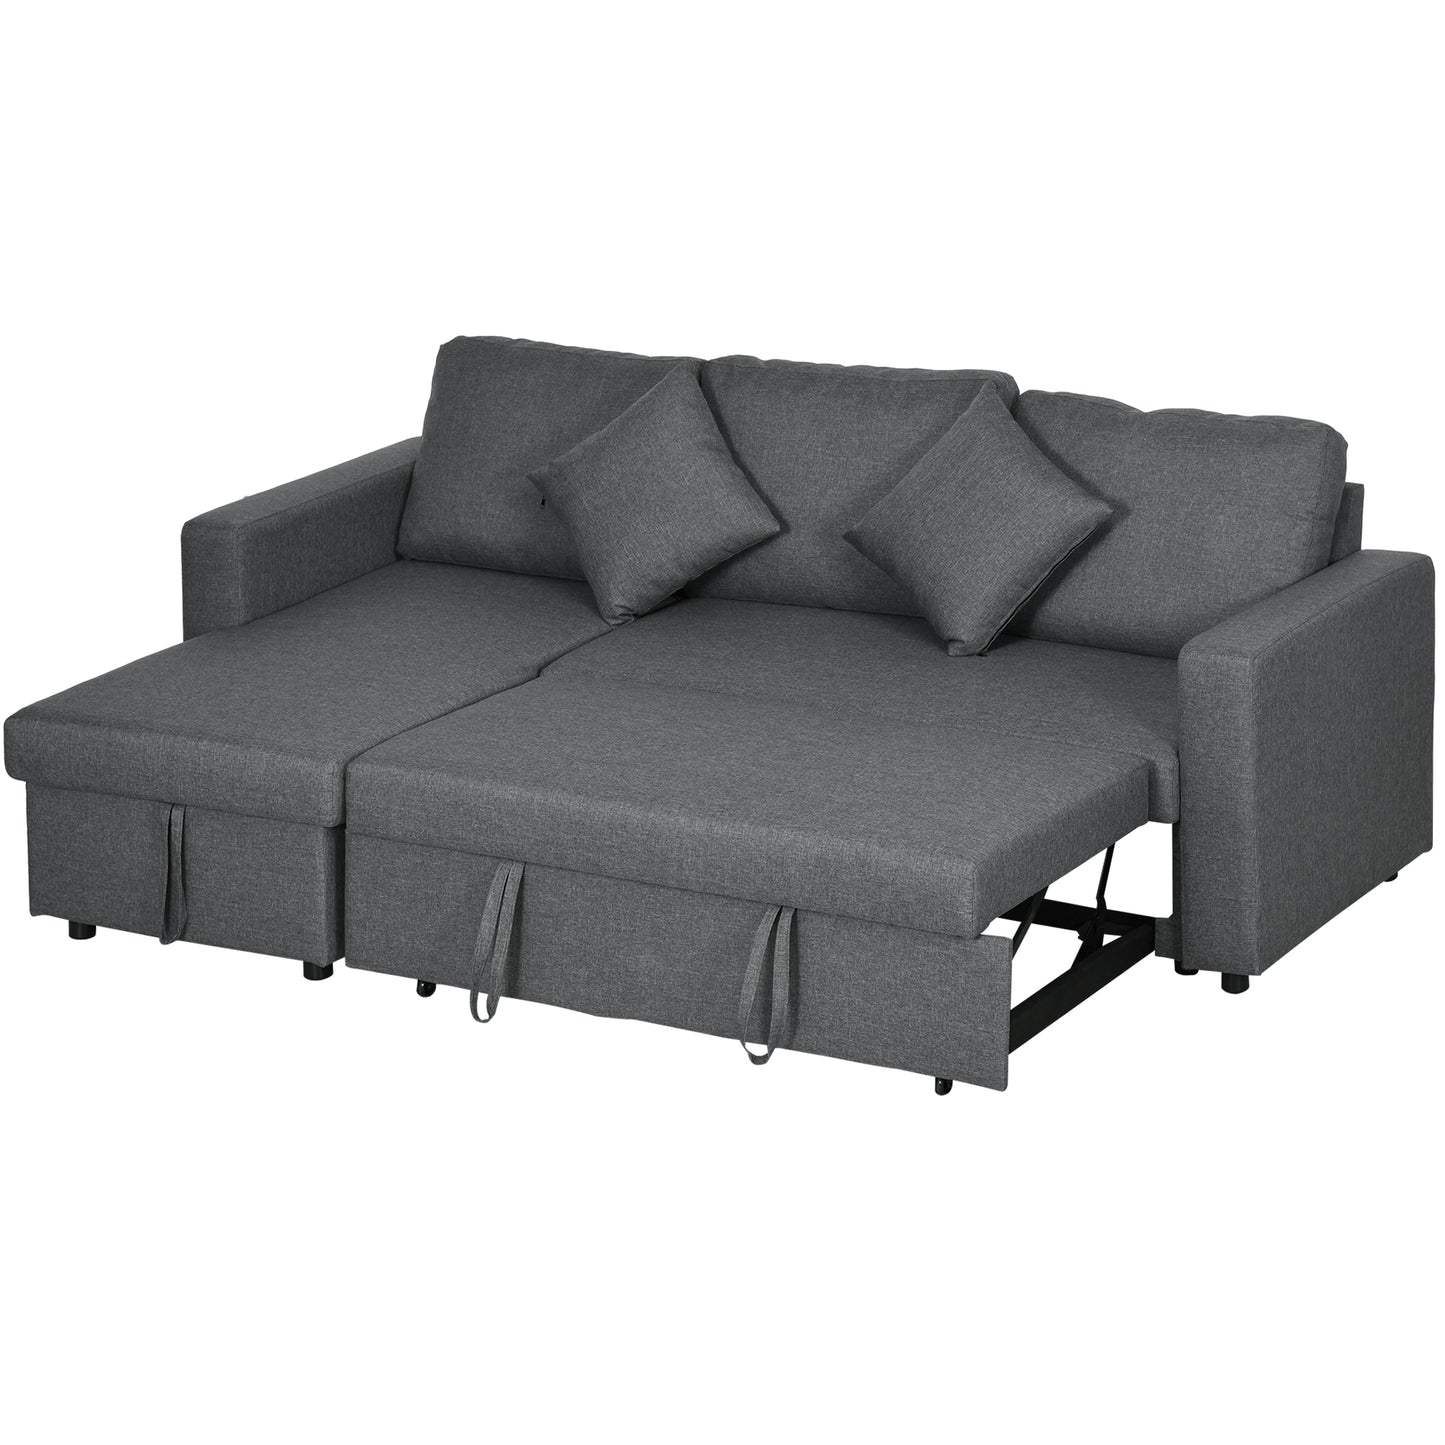 HOMCOM Corner Sofa Bed with Storage, 3 Seater Pull Out Sofa Bed, Convertible L Shape Sofa Couch with Reversible Chaise Lounge for Living Room, Dark Grey